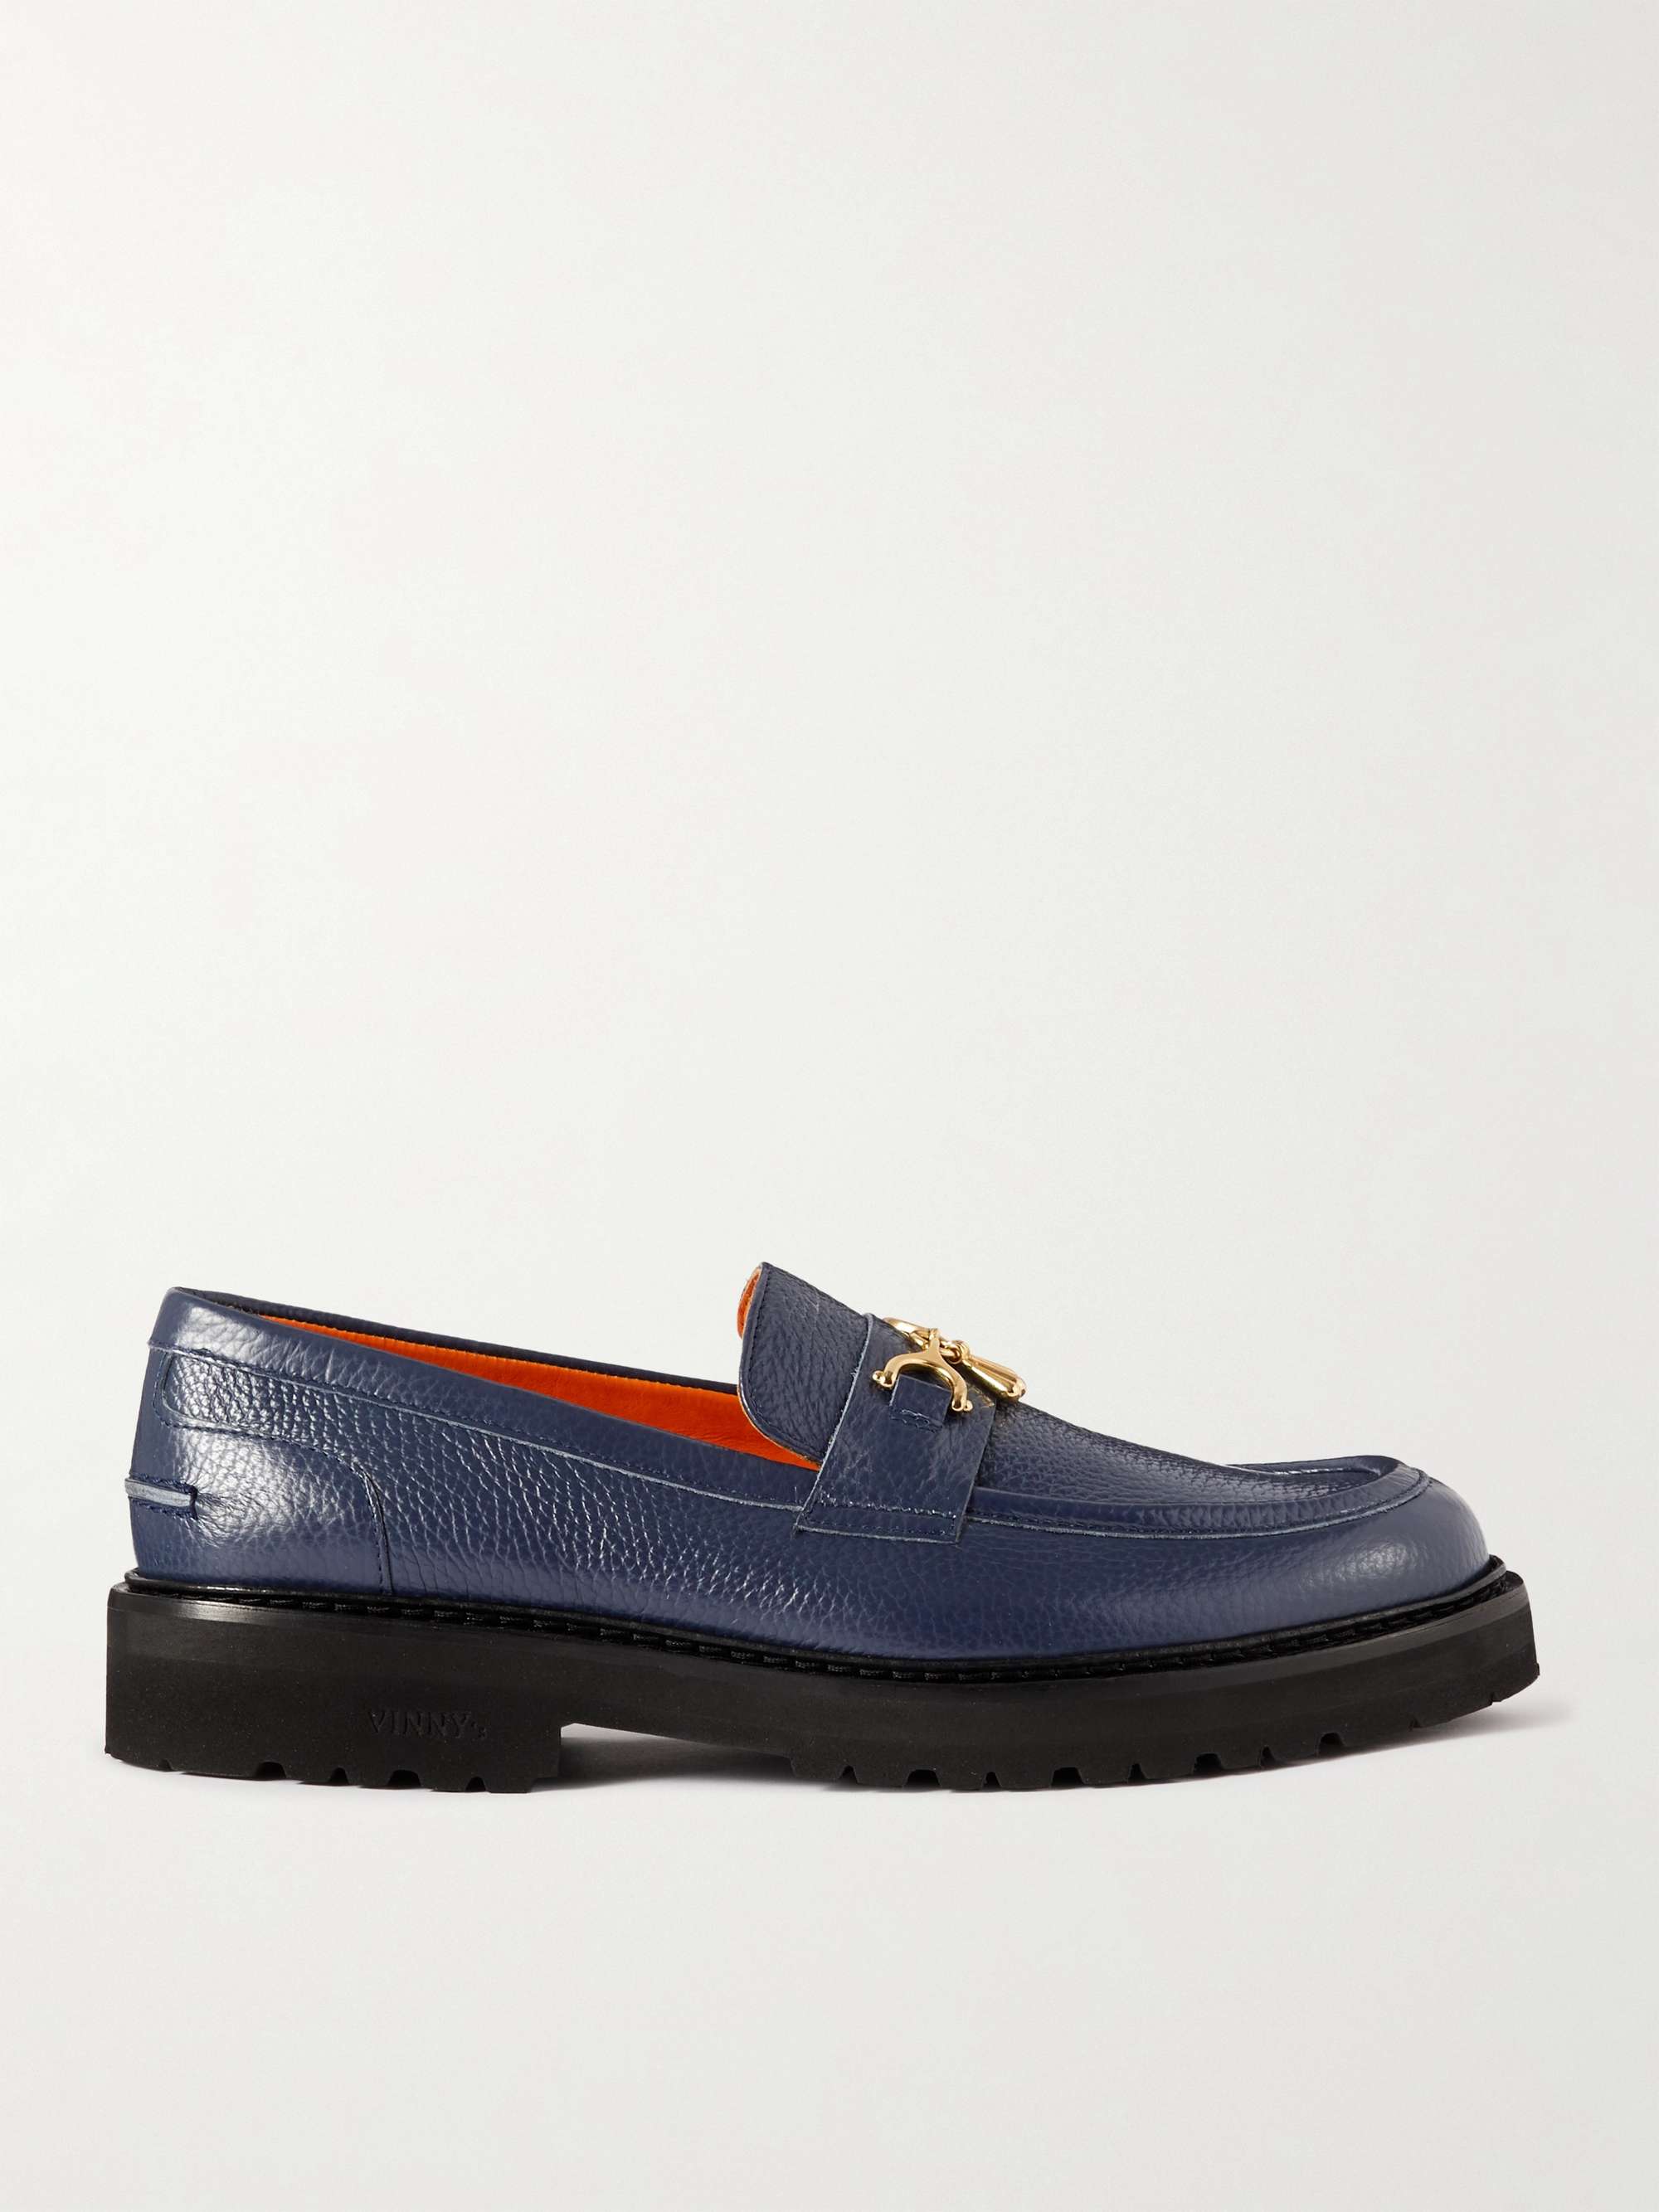 VINNY'S + Soulland Palace Embellished Full-Grain Leather Loafers